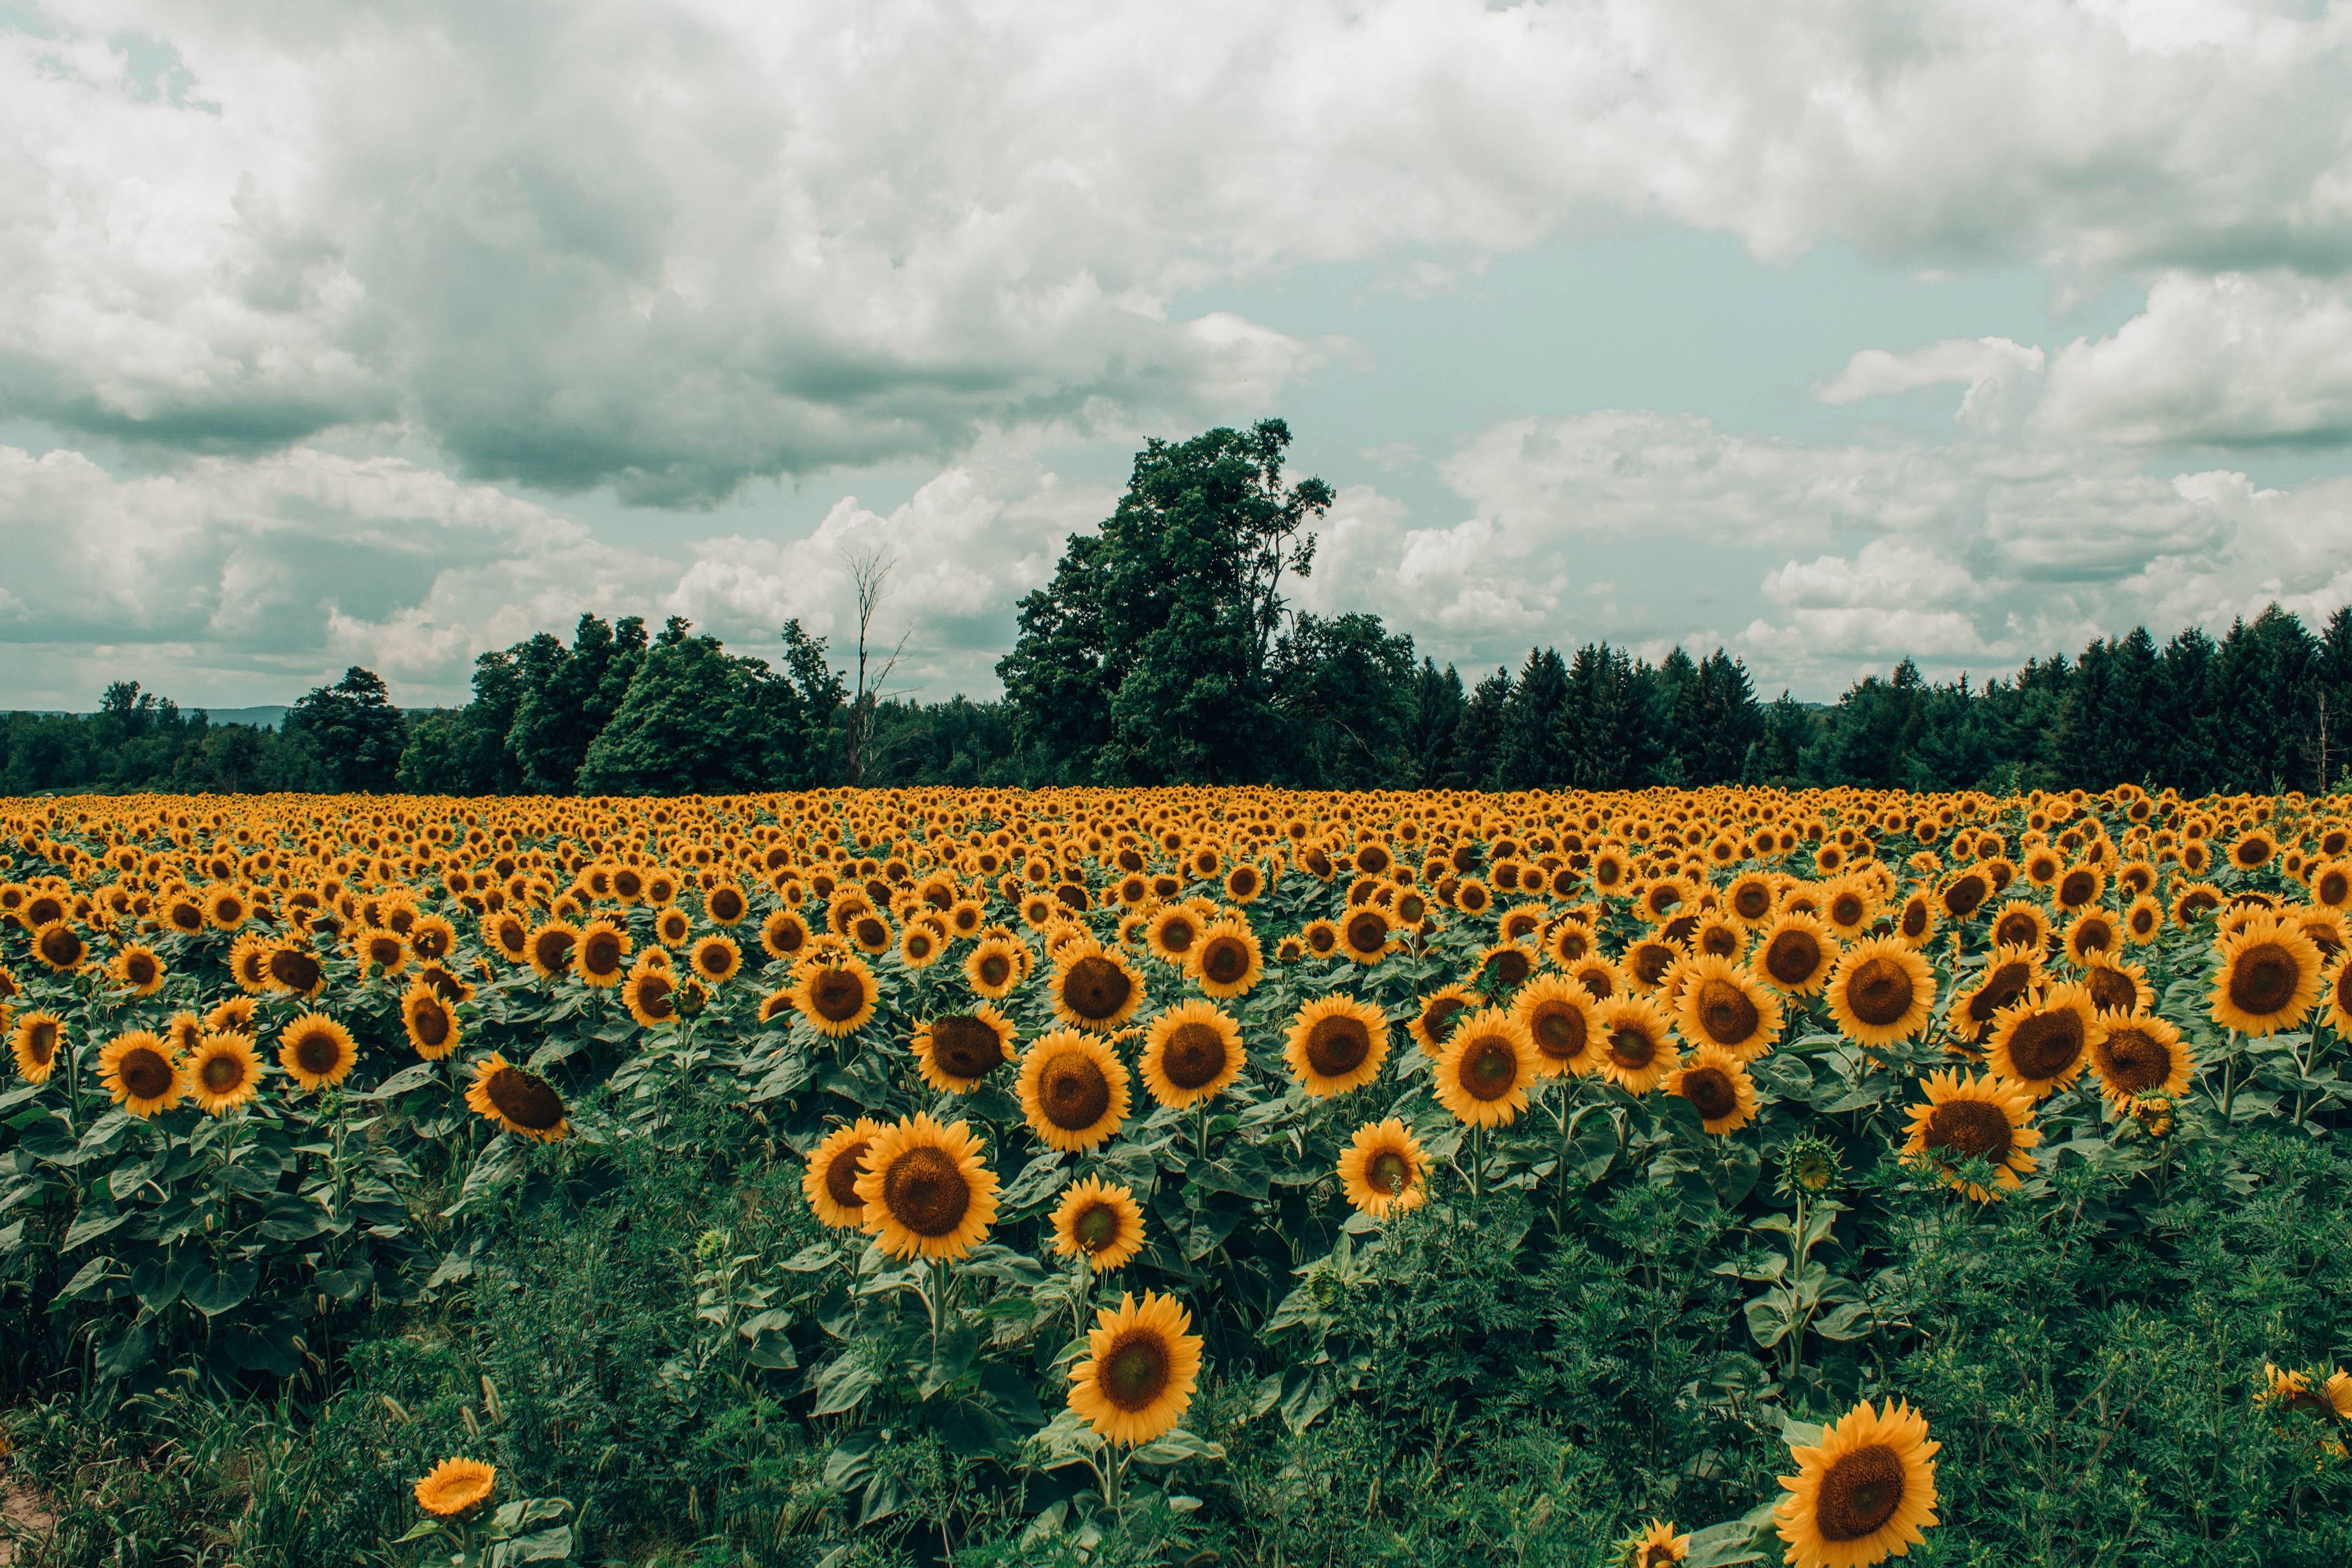 A field of sunflowers in the middle - Farm